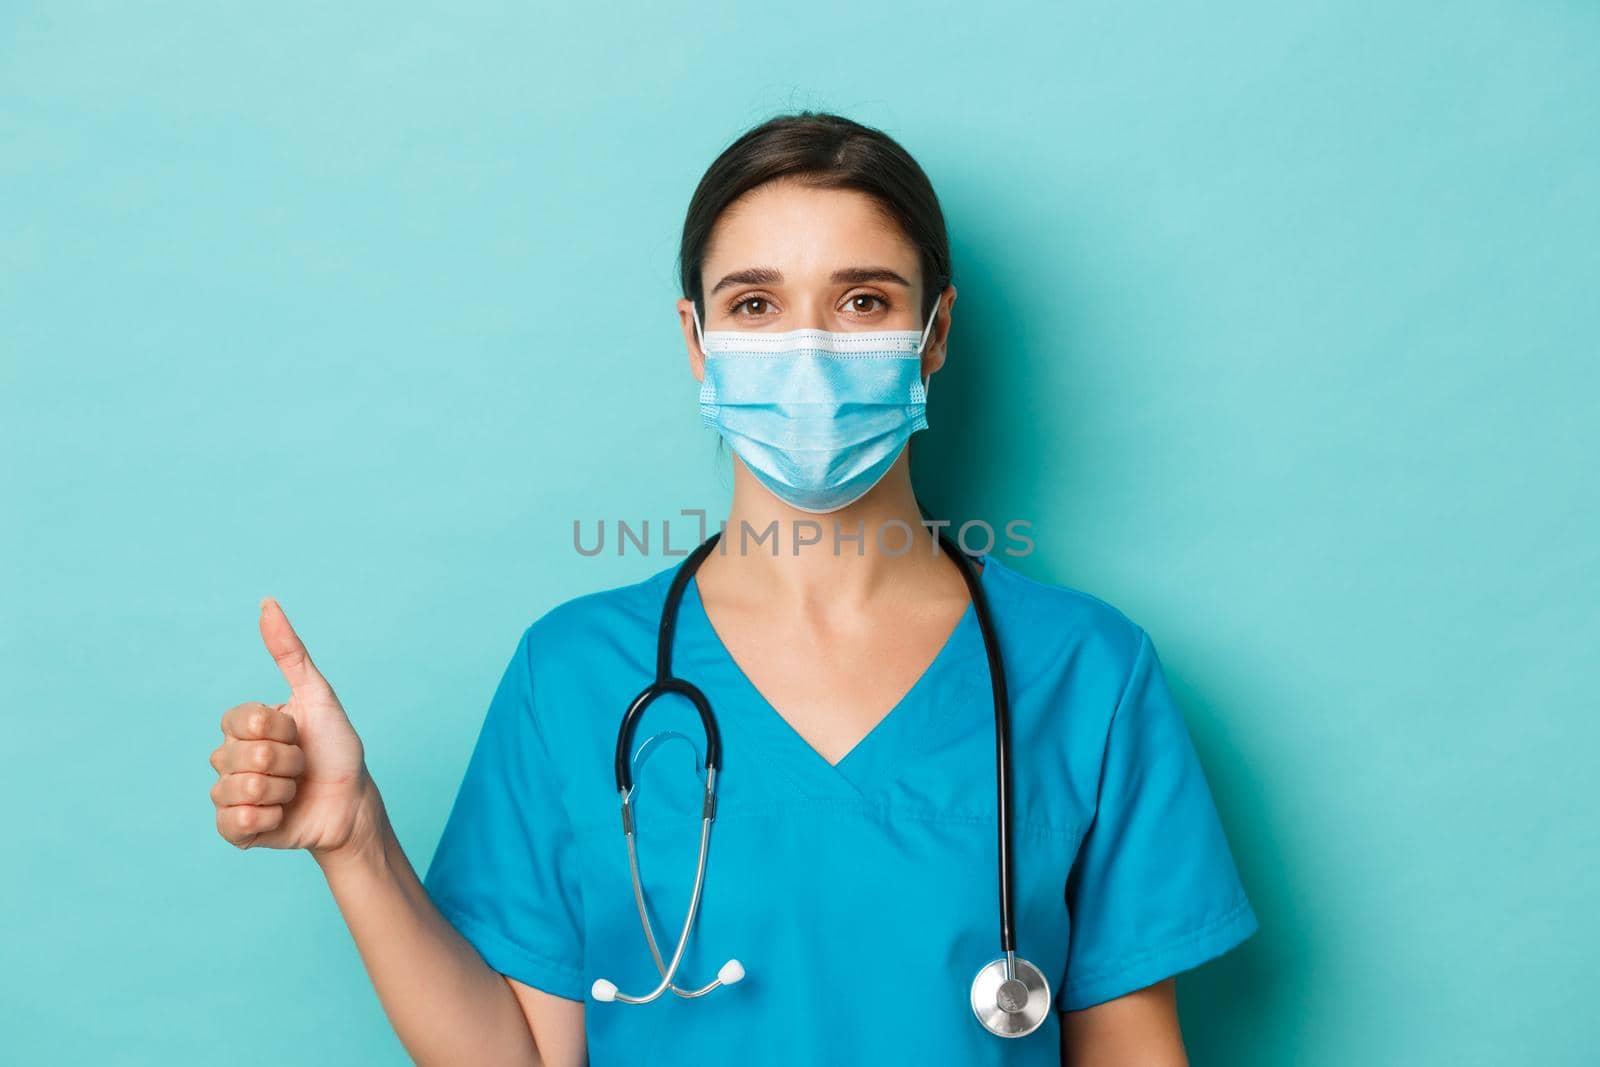 Concept of covid-19 and quarantine concept. Close-up of confident female doctor in medical mask and scrubs, holding stethoscope, showing thumbs-up, standing over blue background.